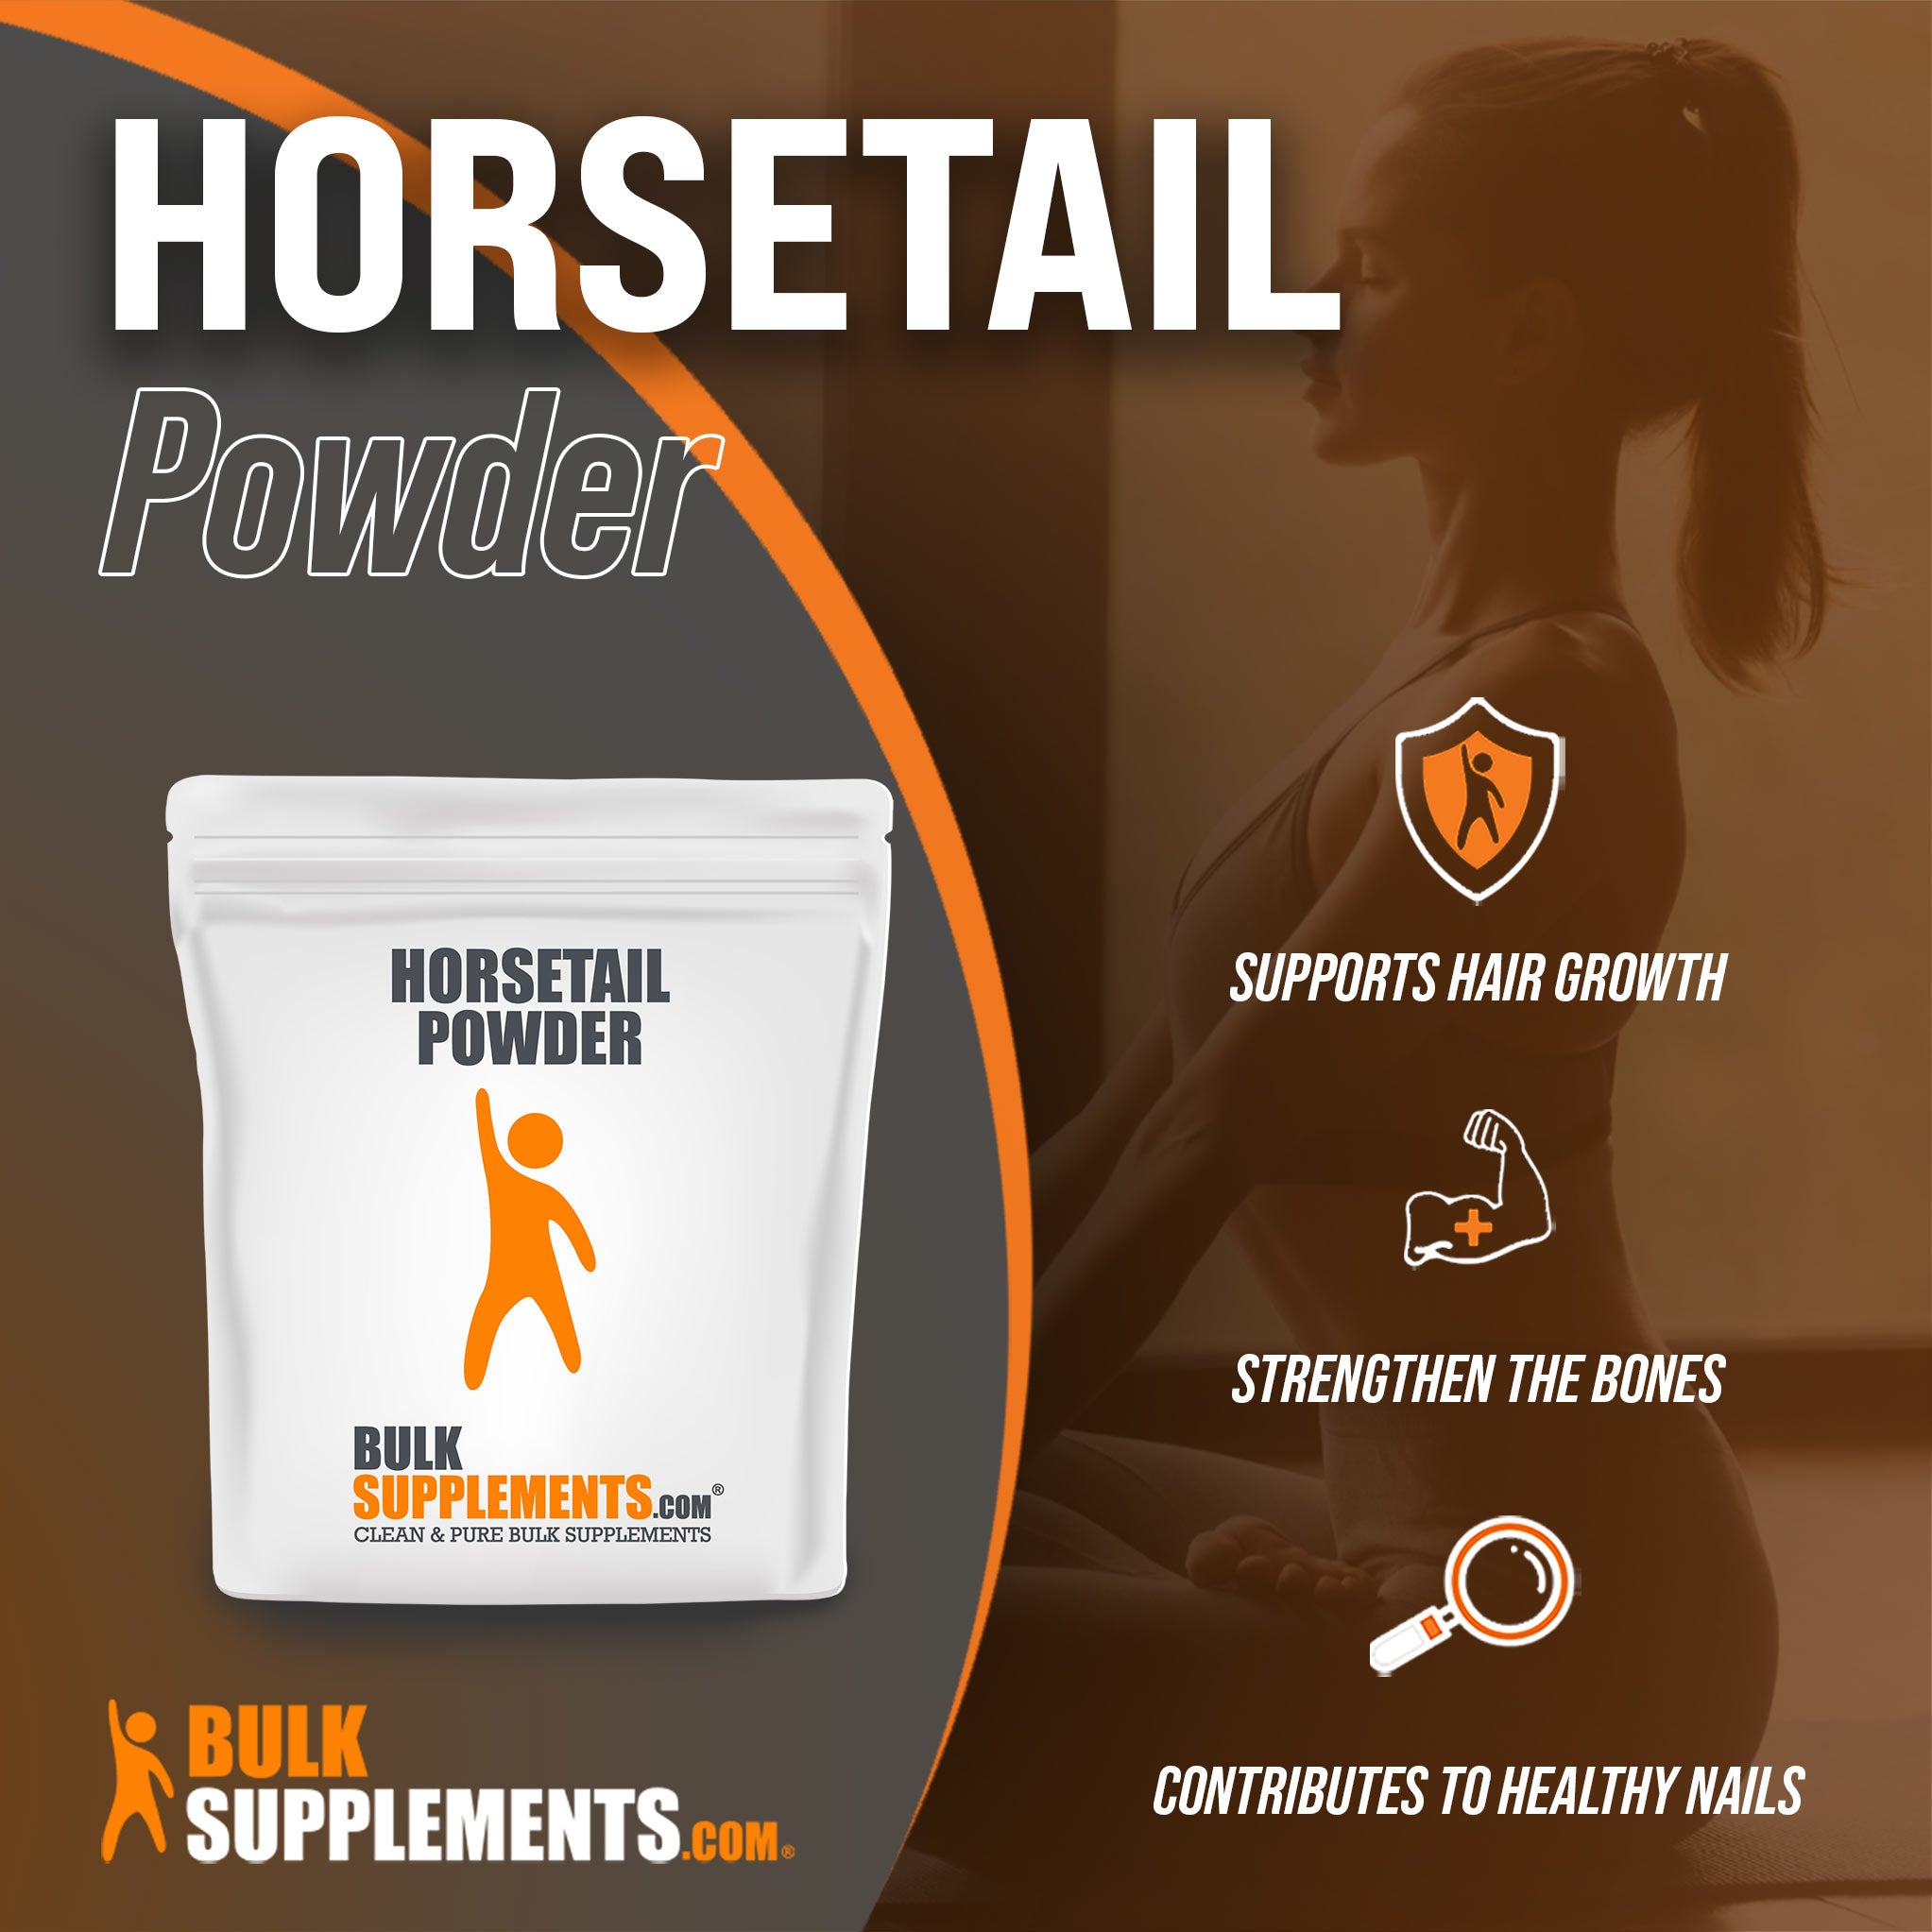 Benefits of Horsetail Powder; supports hair growth, strengthen the bones, contributes to healthy nails